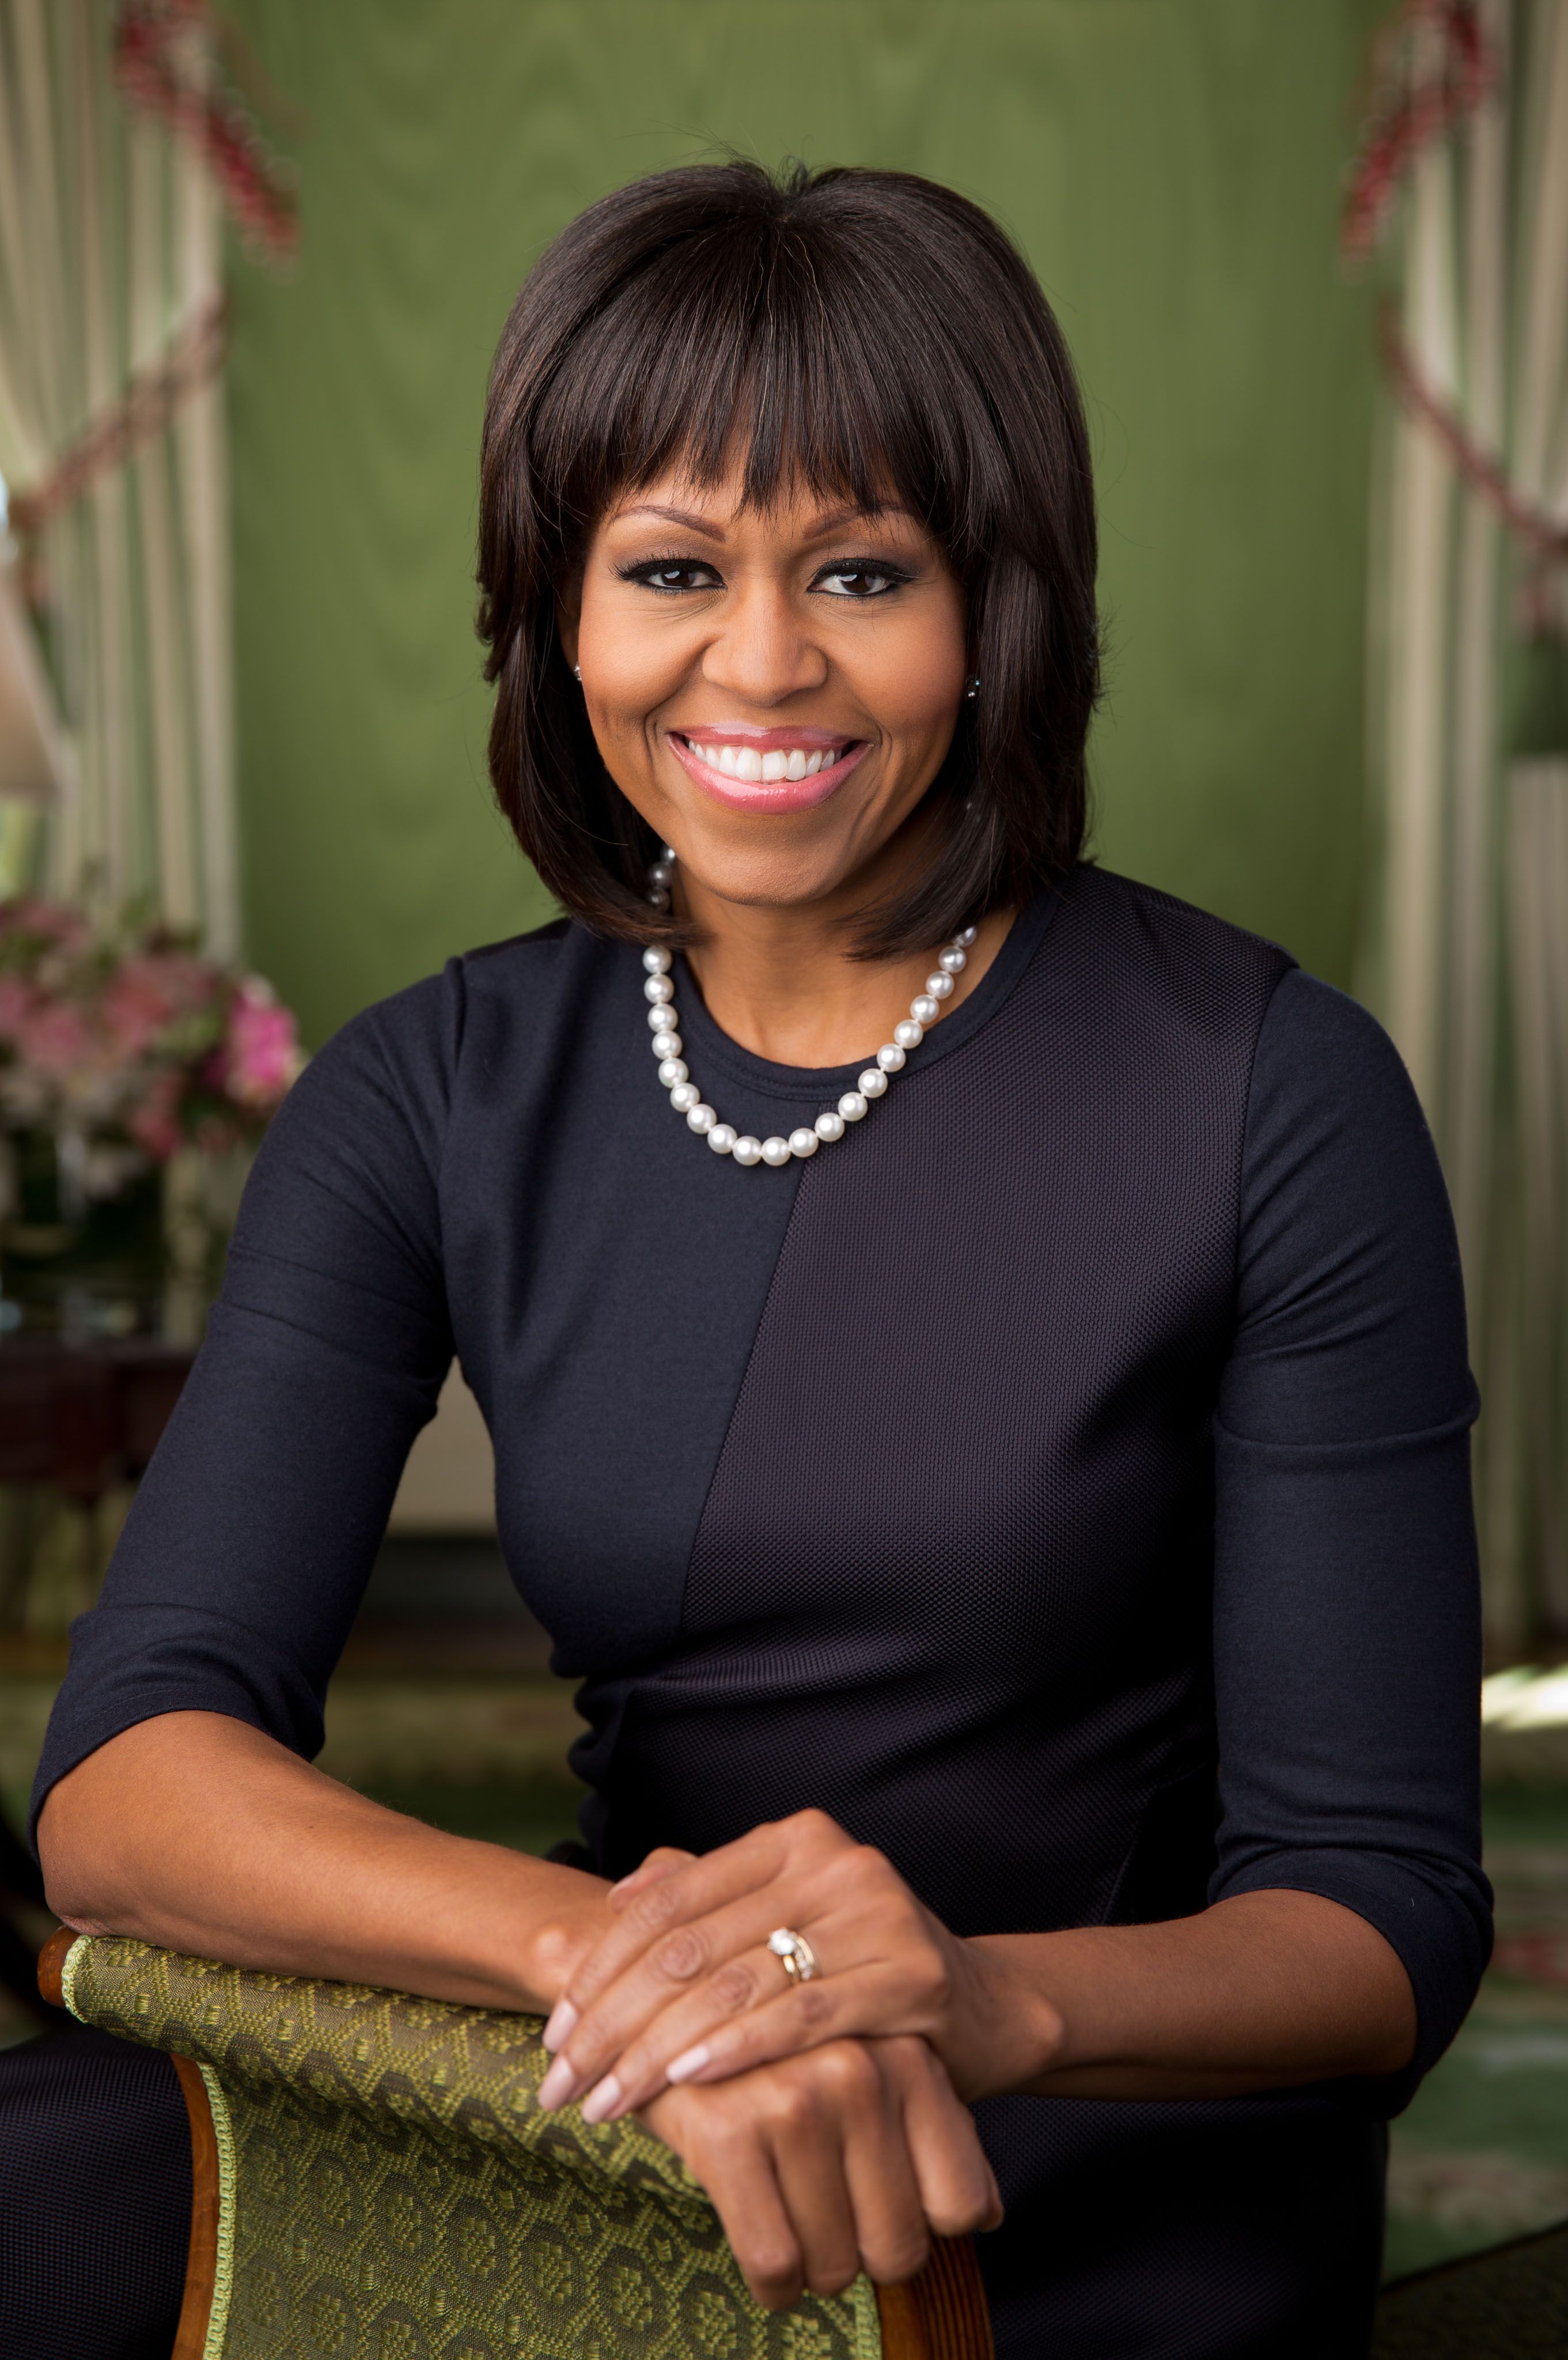 Michelle Obama Embraces Sexuality With Positivity!